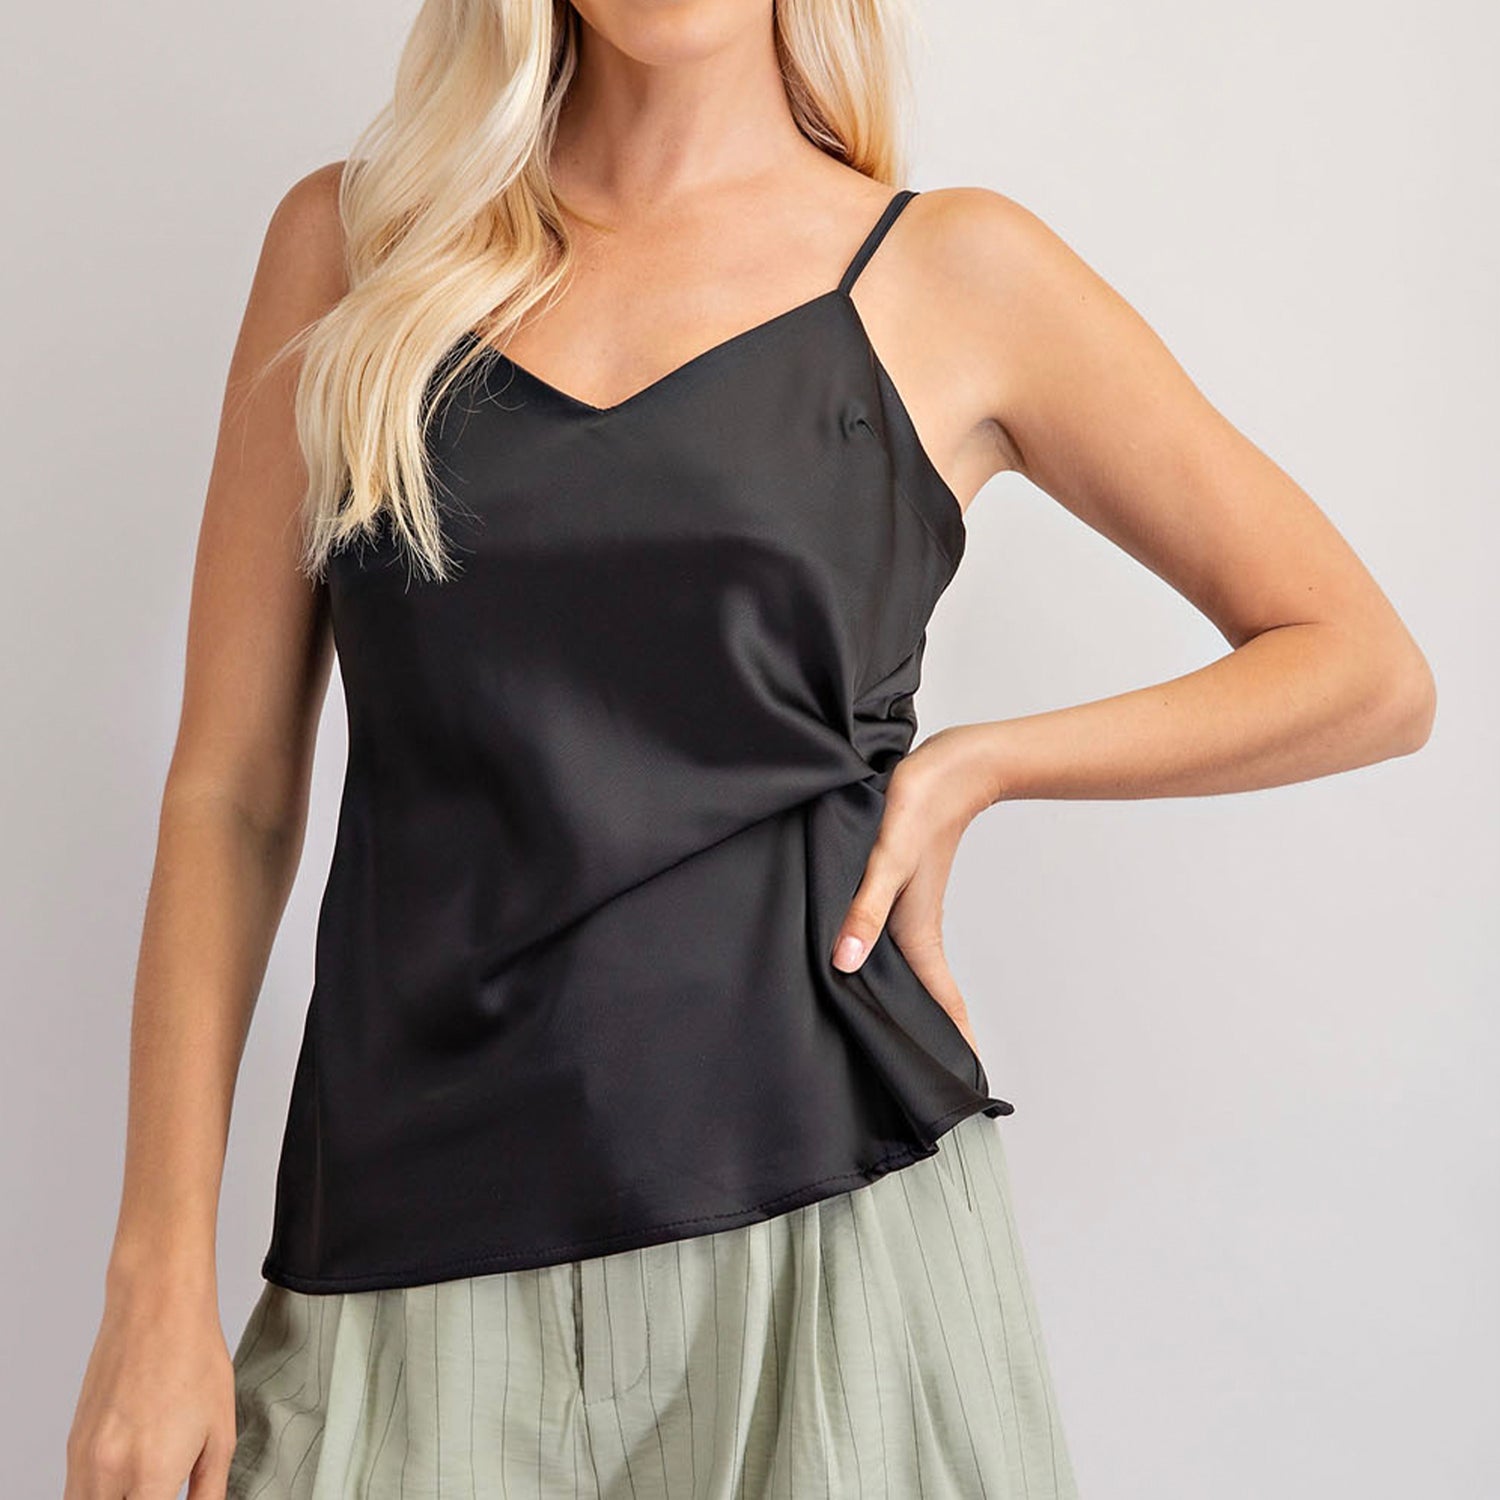 V-Neck Front Knot Cami. Radiate luxe vibes wearing this twist knot v-neck cami! In a flattering design featuring a knot front, V neckline and black satin fabric, this is a new season essential! Finish the look with killer heels and cute bottoms for the perfect party ready style! 